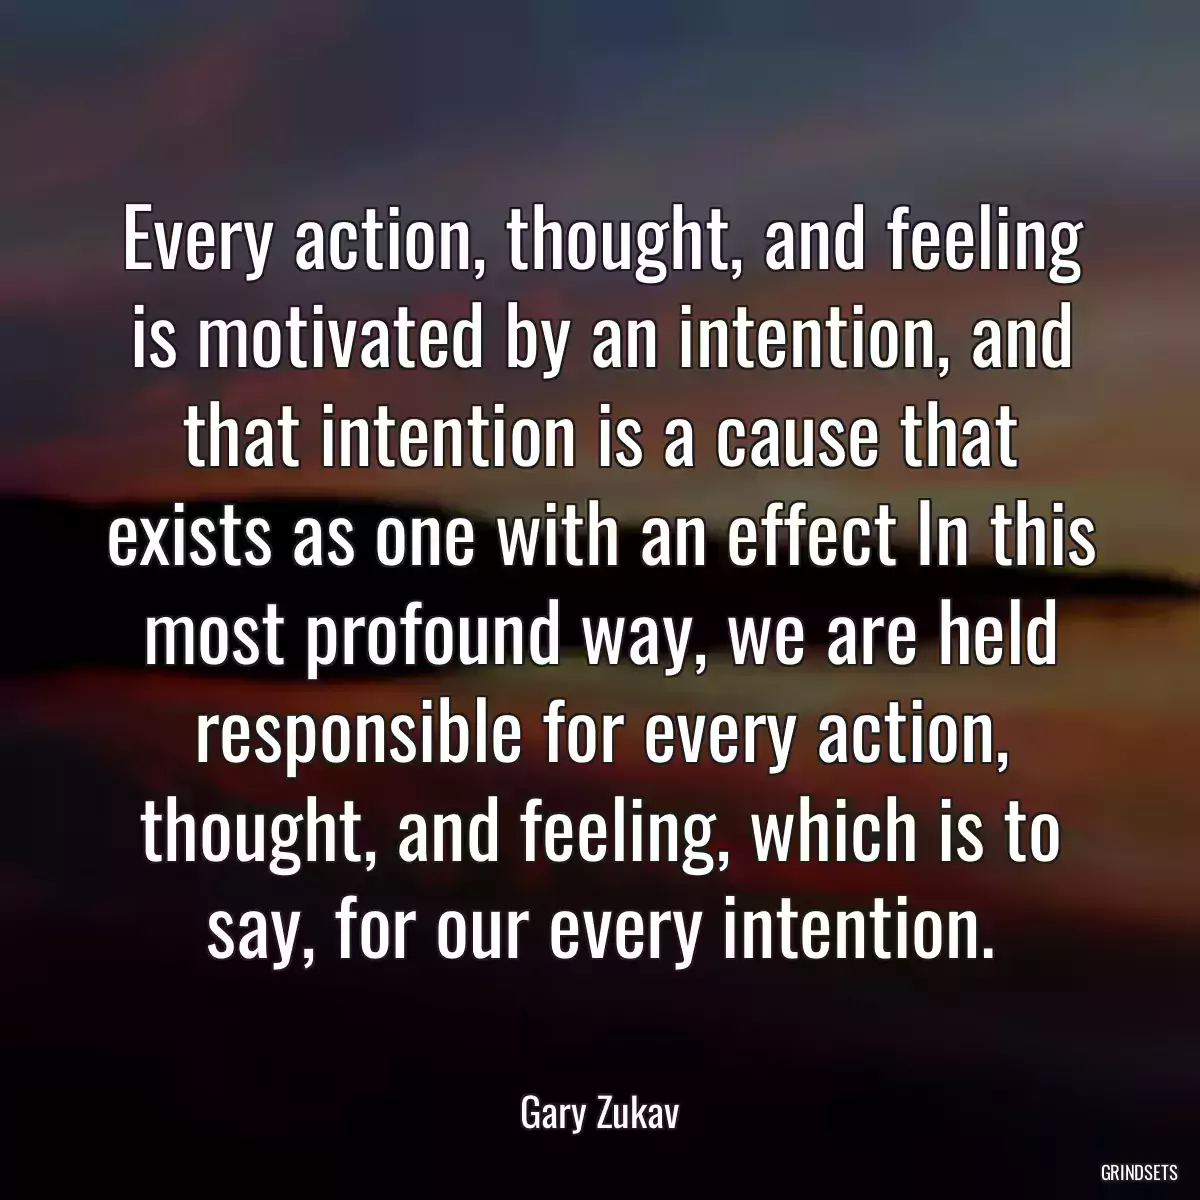 Every action, thought, and feeling is motivated by an intention, and that intention is a cause that exists as one with an effect In this most profound way, we are held responsible for every action, thought, and feeling, which is to say, for our every intention.